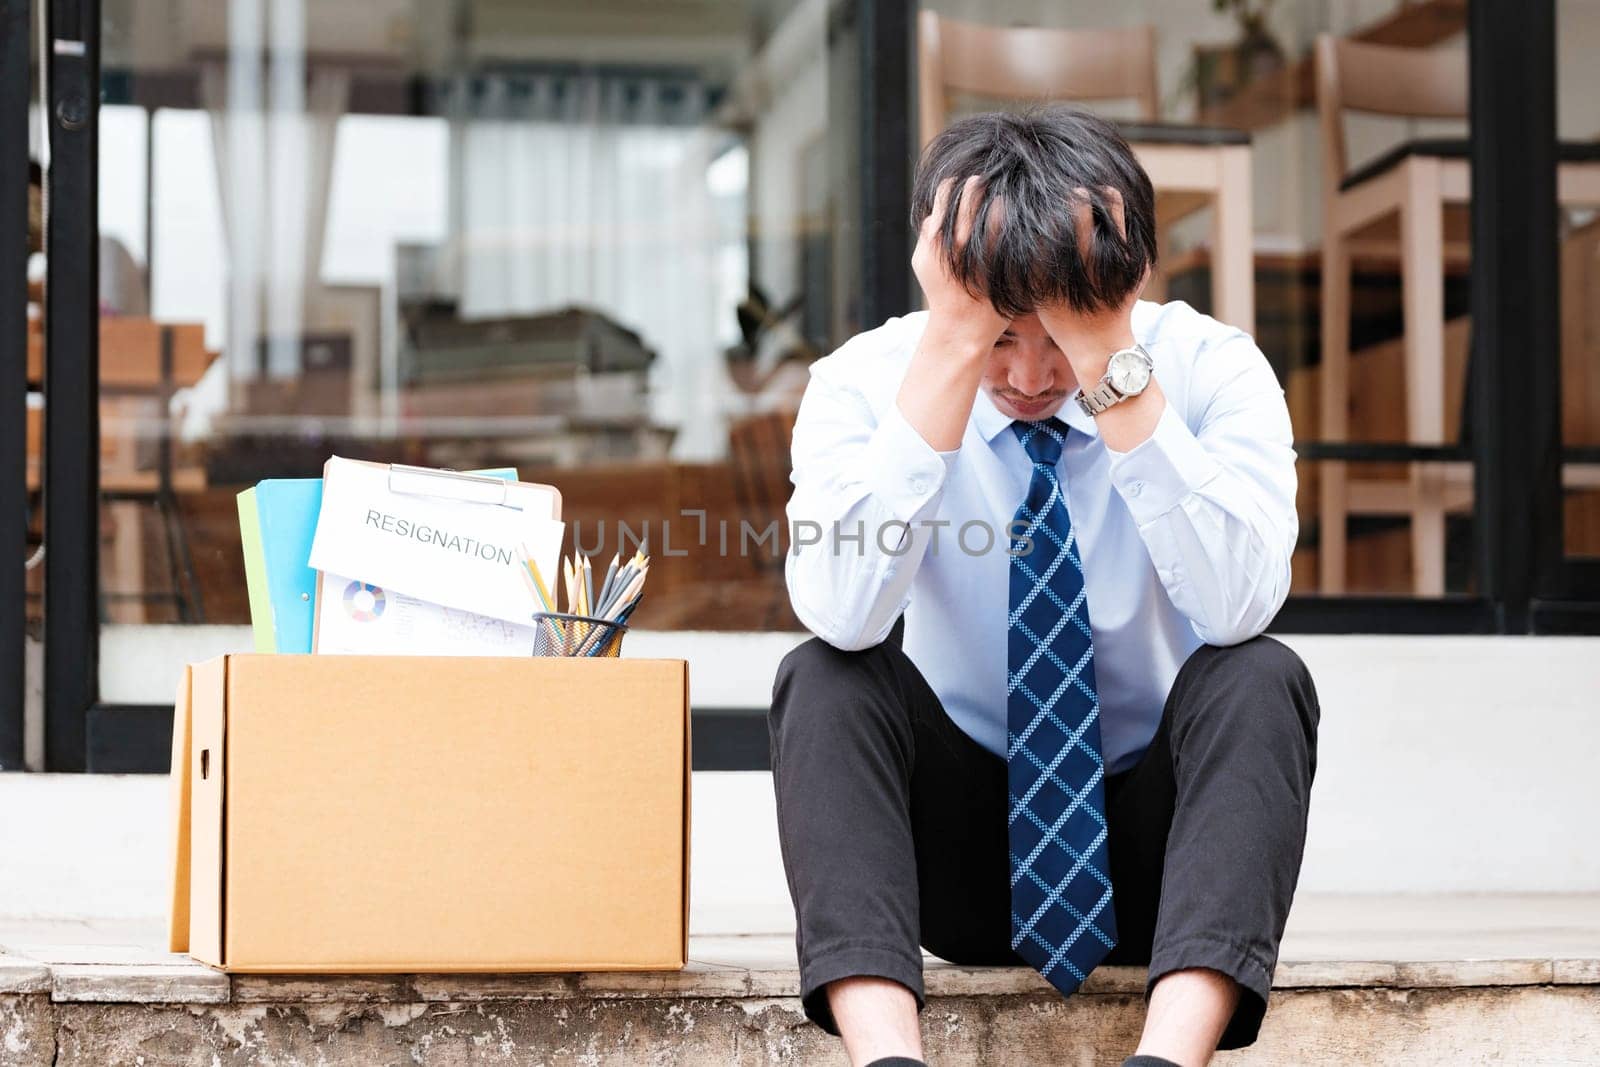 Disheartened Man Sitting on Stairs with Box of Personal Items, Overwhelmed by Emotions After Resignation or Job Loss